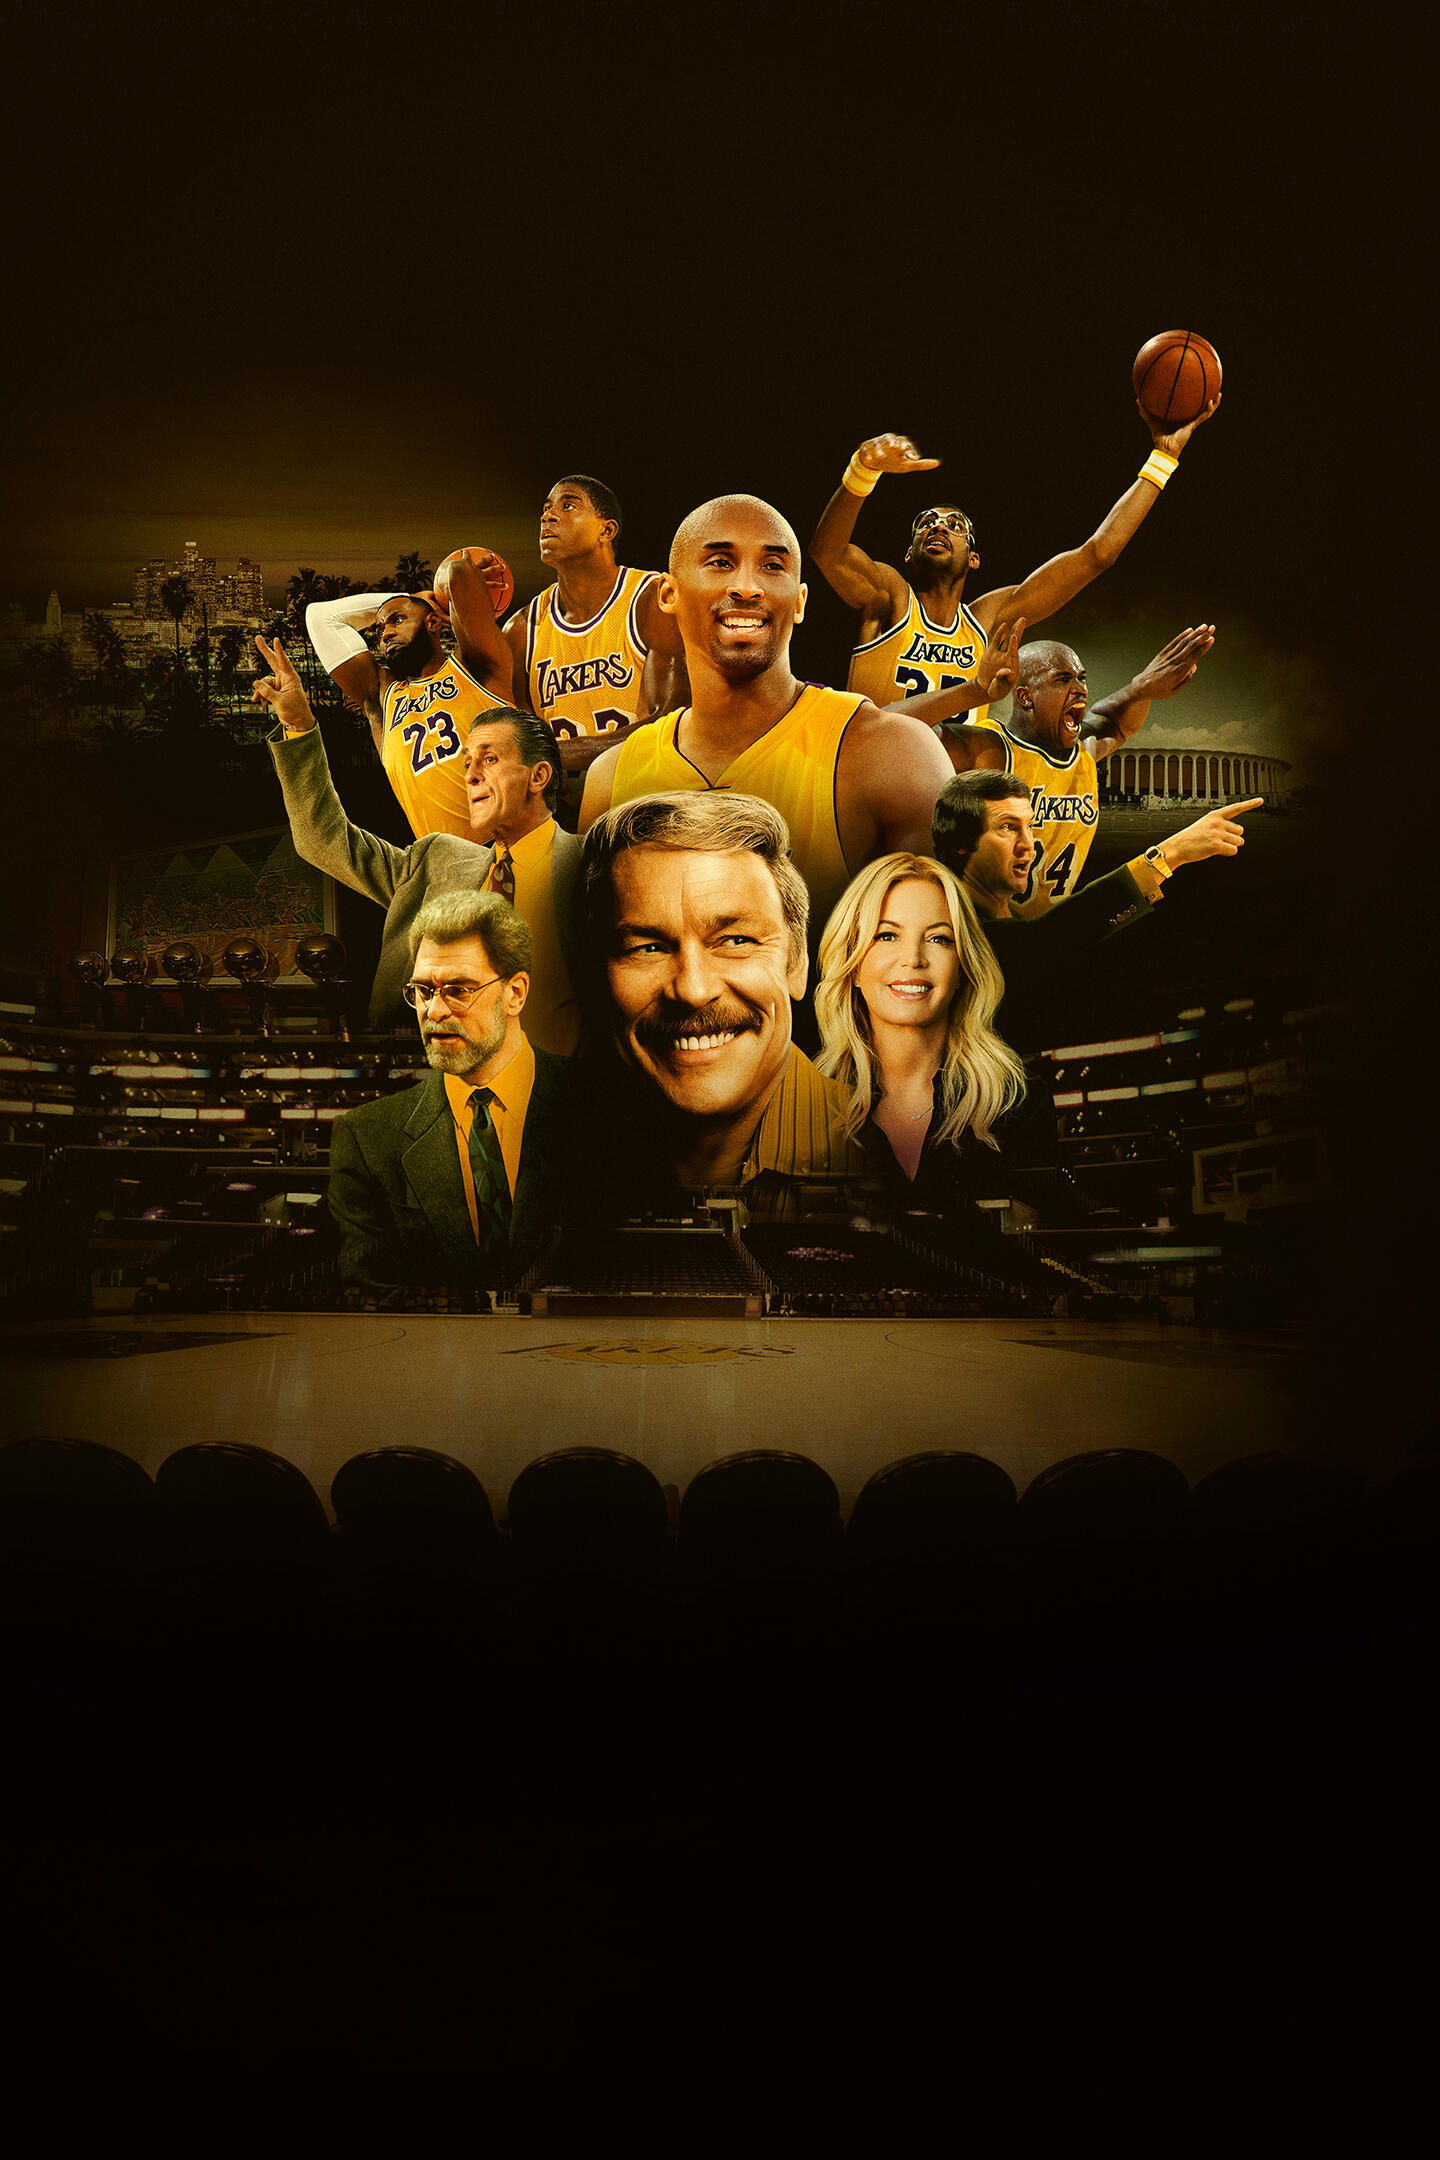 Legacy: The True Story of The LA Lakers -- Season 1 -- “Legacy: The True Story of the LA Lakers” captures the remarkable rise and unprecedented success of one of the most dominant and iconic franchises in professional sports. Featuring exclusive access to the Buss Family and probing, revealing interviews with players, coaches, and front office execs, this 10-part documentary series chronicles this extraordinary story from the inside – told only by the people who lived it. When charismatic real estate tycoon Dr. Jerry Buss purchased the Los Angeles Lakers in a wildly risky and complex business deal, nobody could’ve predicted just how much success was to come. Kicking off the “Showtime” era in 1979, the notorious L.A.-playboy pioneered the business of basketball. He raised the price of floor seats, introduced dancers and a live band, opened an exclusive private club inside the arena, and cultivated famous fans in Hollywood. Over the last 40 years, the team captured 11 titles and retired the jerseys of some of the NBA’s most legendary players. Today, Dr. Buss's empire is now worth more than $5 billion. But all of that success did not come easy. Along with notorious feuds, career-ending illnesses, and a bevy of insurmountable on-court obstacles, the Lakers have also weathered intense drama off the court – within Dr. Buss’s own family. Running the franchise as a “mom and pop” operation, Dr. Buss gave his children front office jobs with the understanding they would, someday, inherit his kingdom. But sibling rivalry, interpersonal conflict, and corporate unrest threatened to destroy everything Dr. Buss worked so hard to build. Ultimately, “Legacy: The True Story of the LA Lakers” is about family, business, and power –and how all three must be harnessed to achieve greatness. (Courtesy of Hulu)